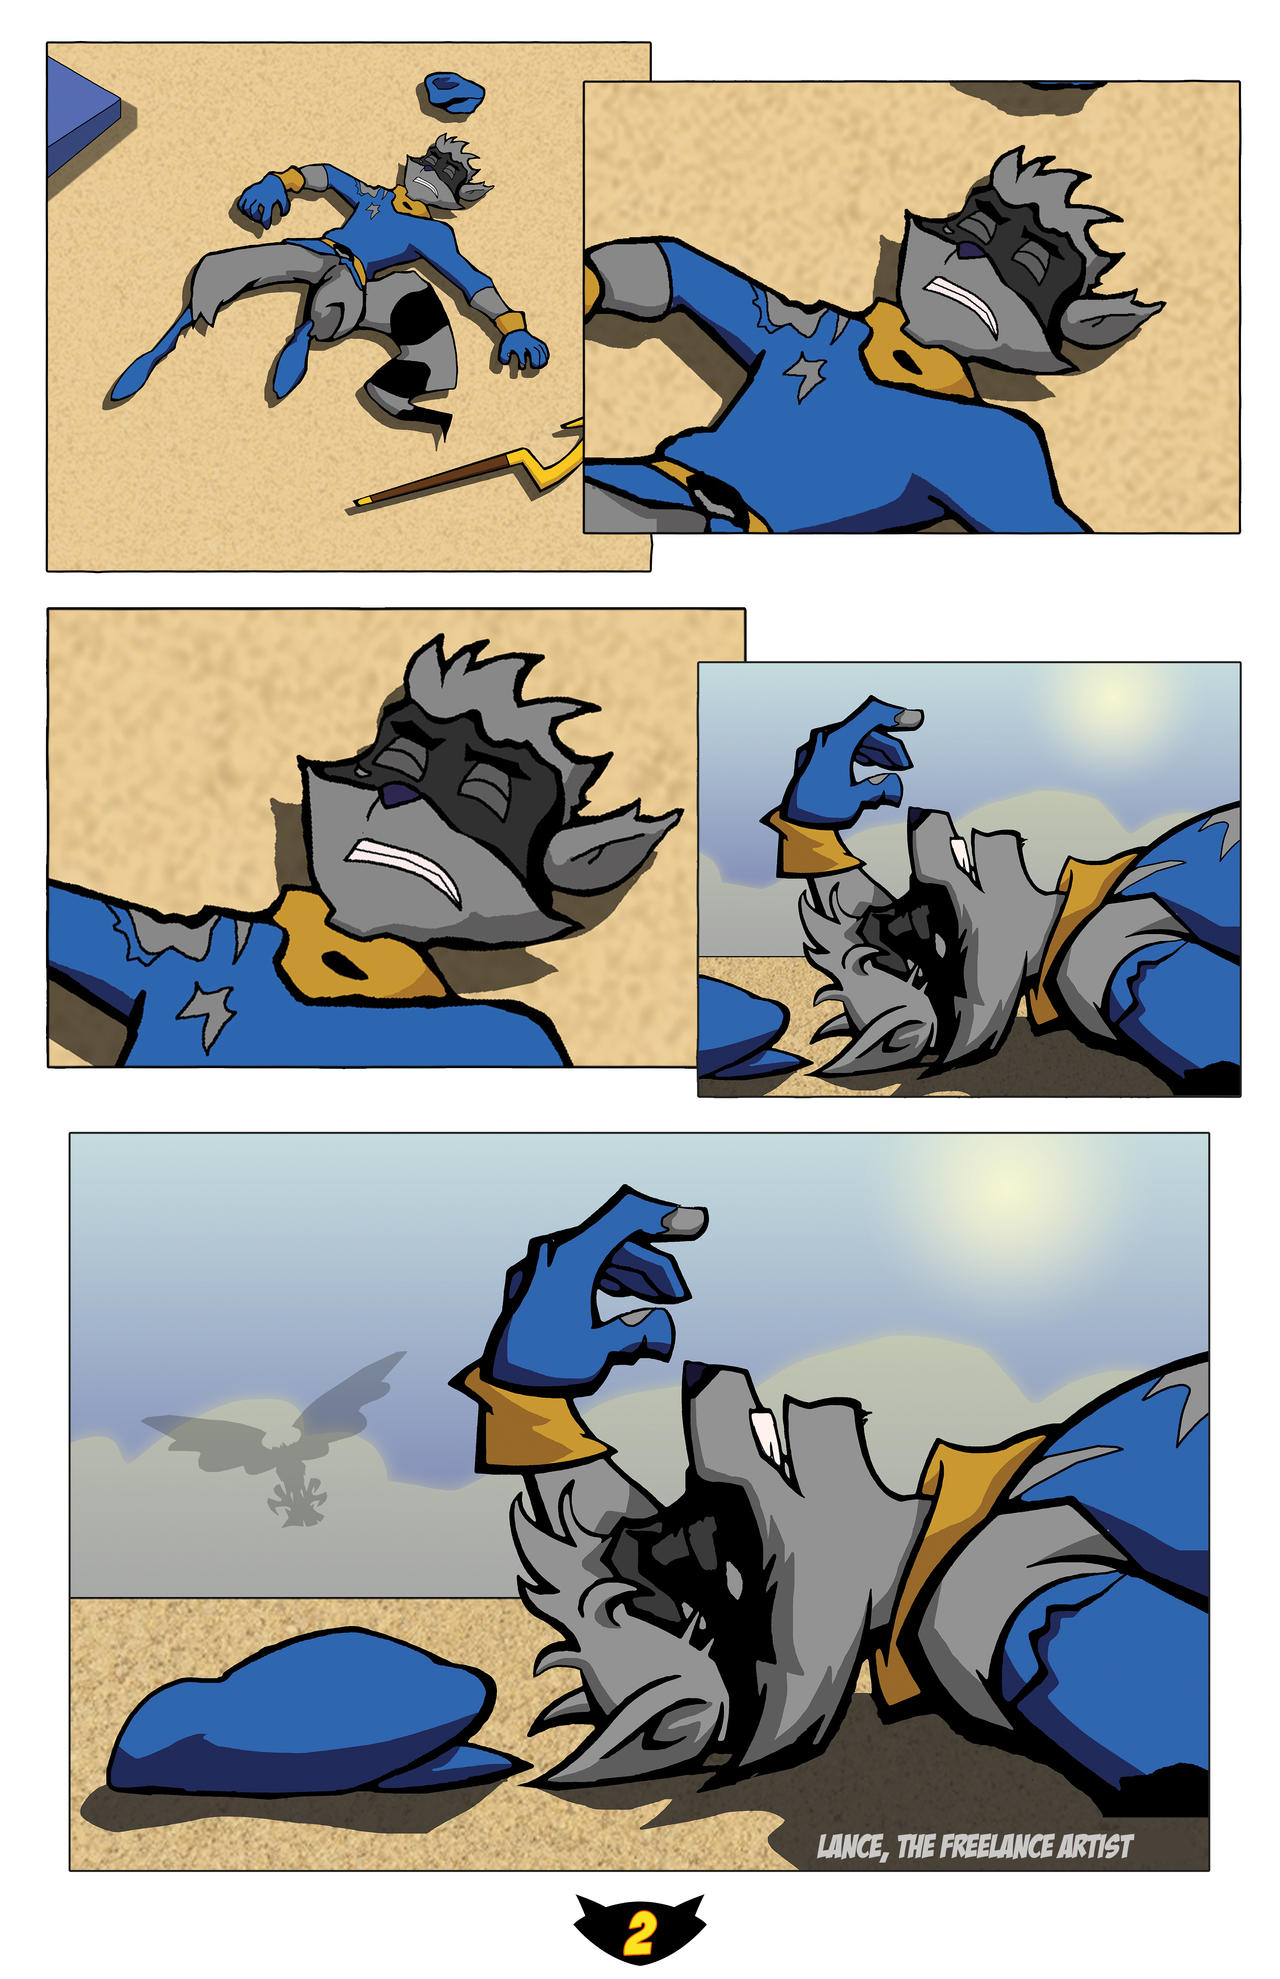 Sly Cooper: A Master Thief's End Issue 5 by LanceFreelanceArtist